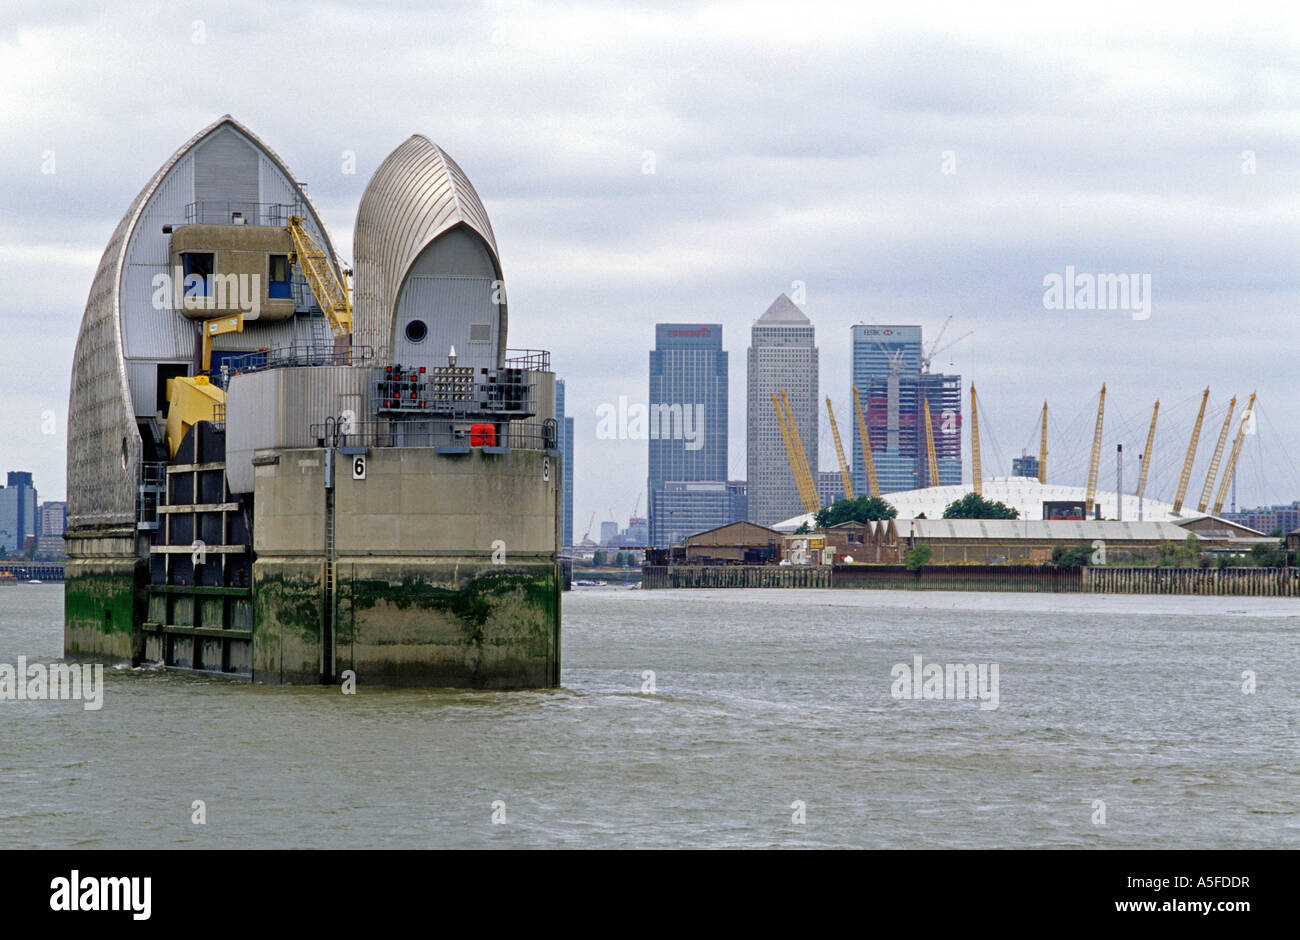 Flood gates on the River Thames in London Stock Photo